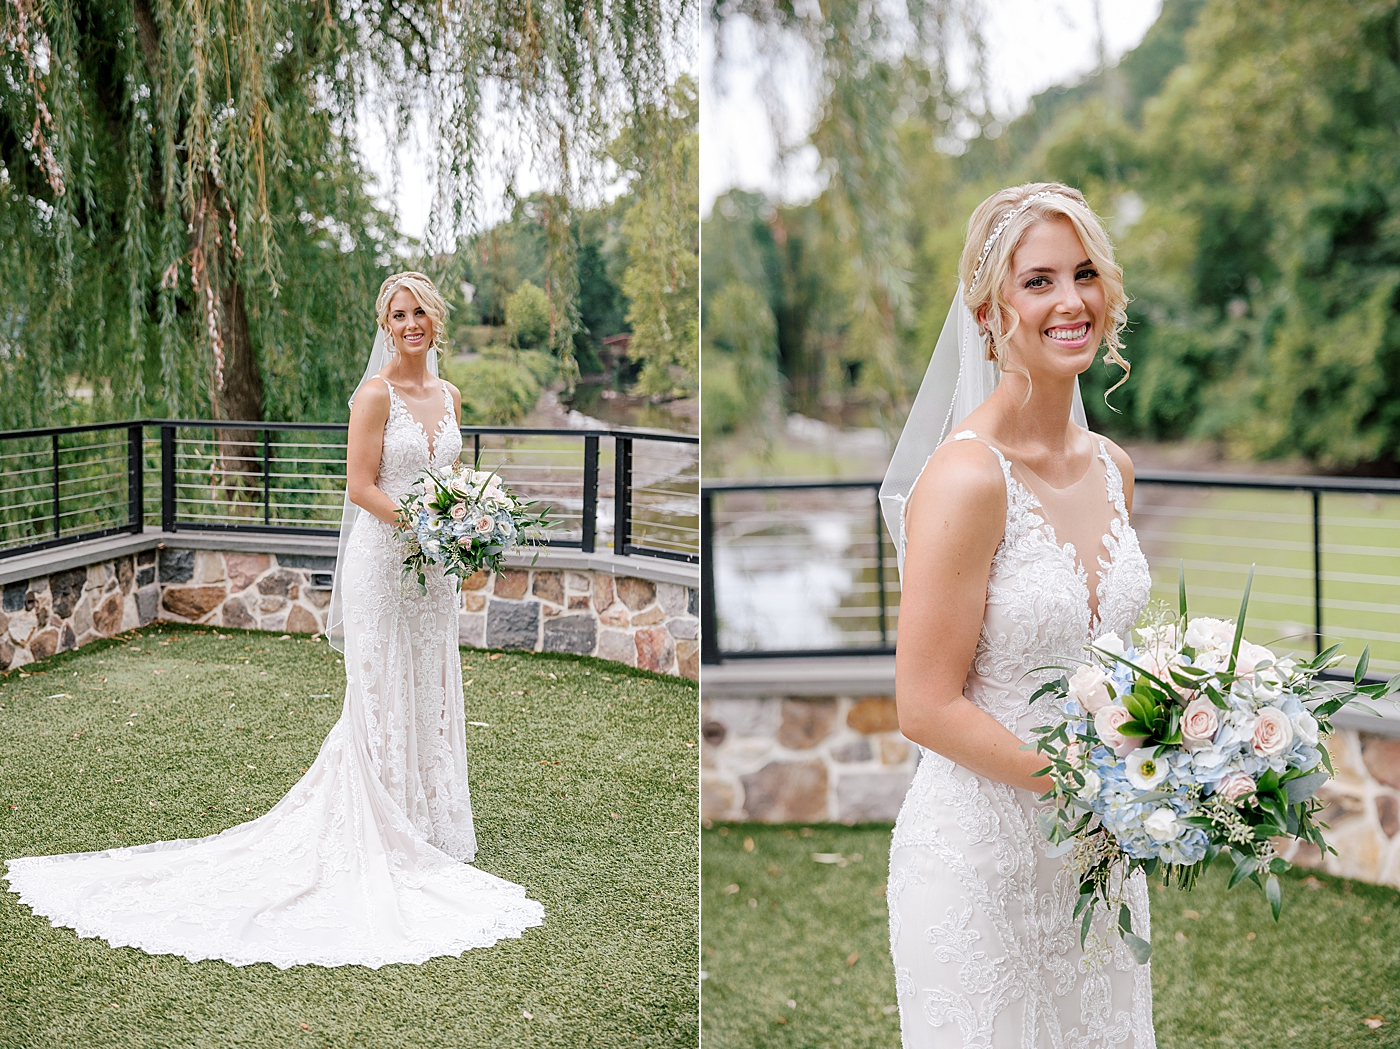 Smiling bride holding her bouquet | Image by Hope Helmuth Photography